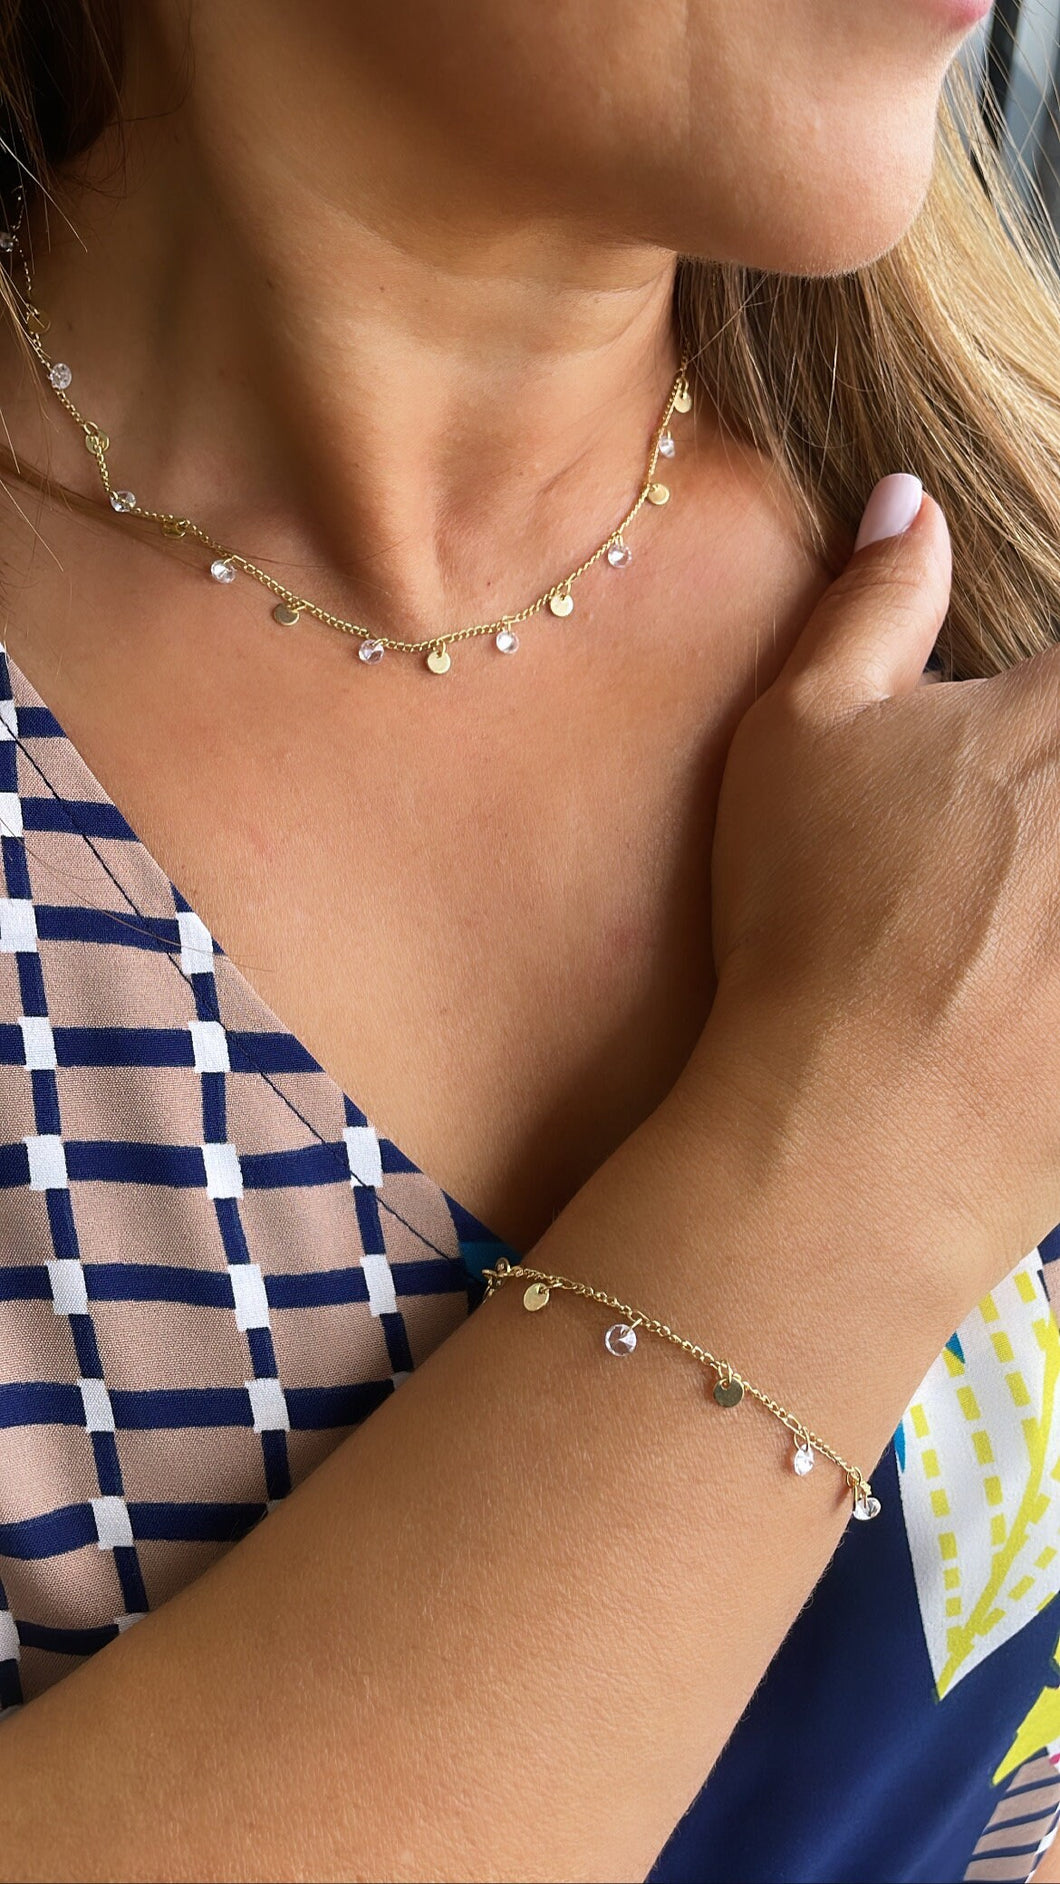 18k Gold Filled Dainty Curb Link Choker Set With Small CZ Flat Beaded Charms Dangling, For Her, Summer Jewlery, Bridal Jewlery